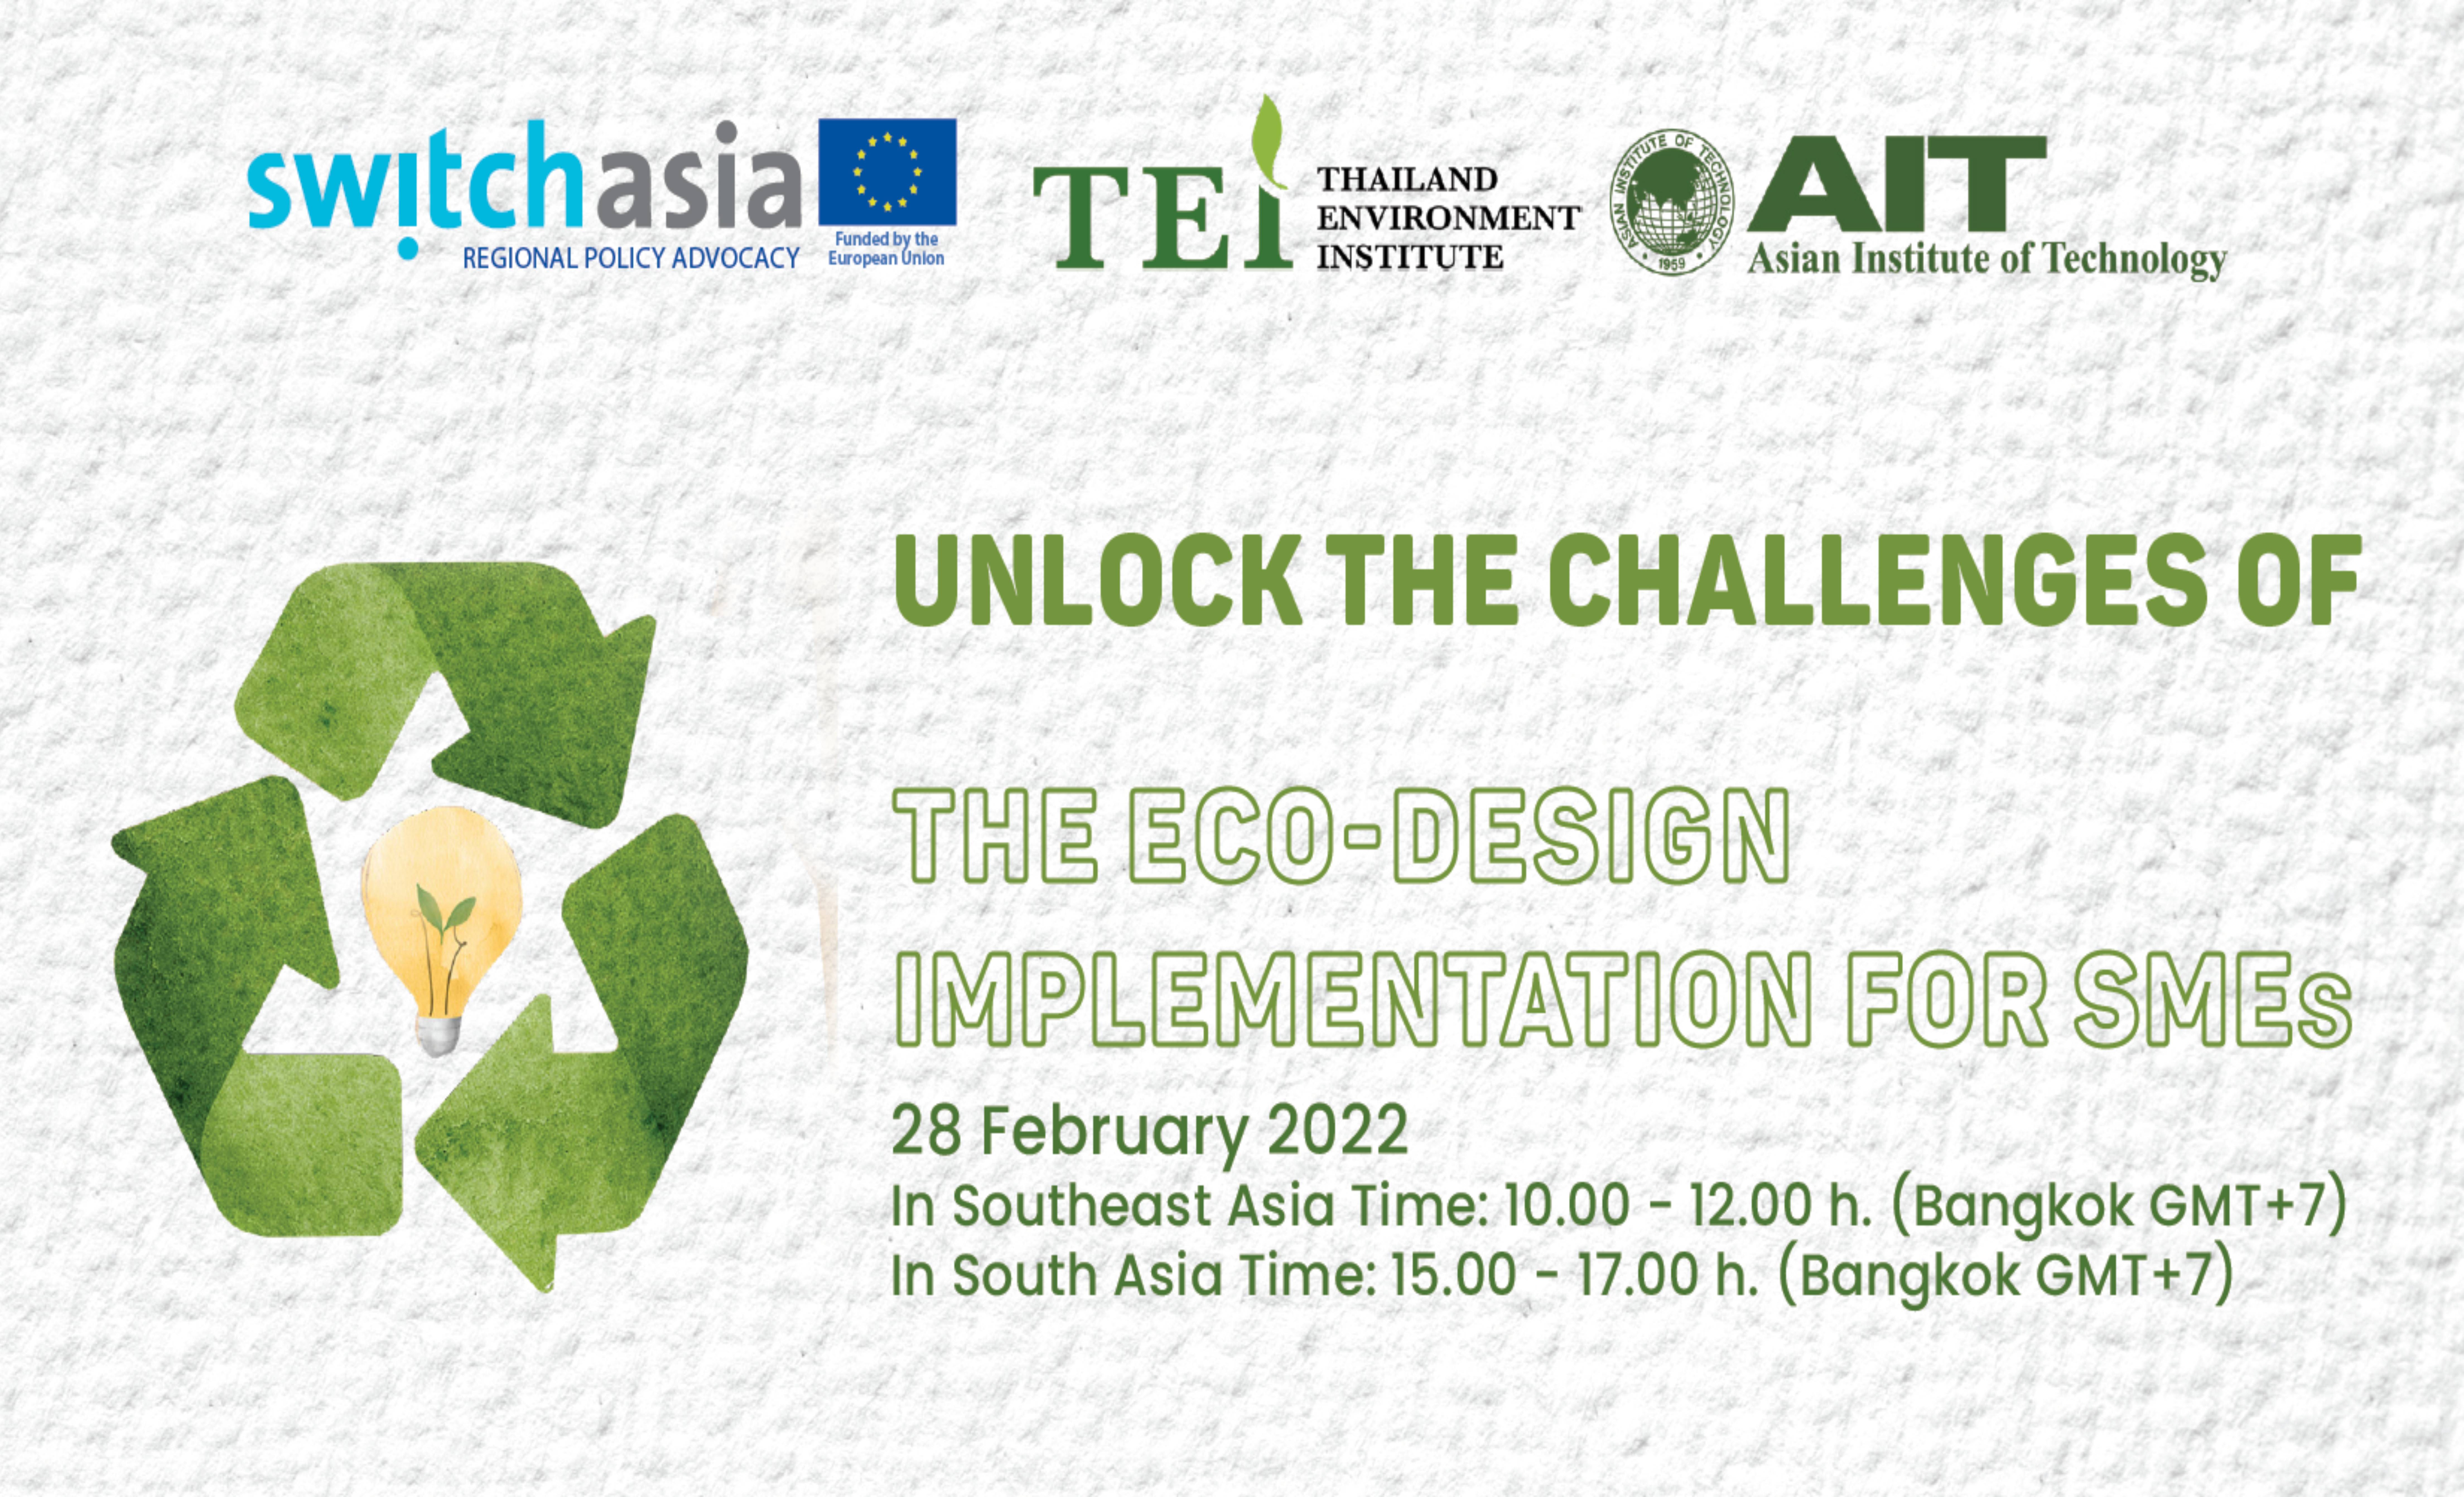 Unlock the Challenges of the Eco-design Implementation for SMEs